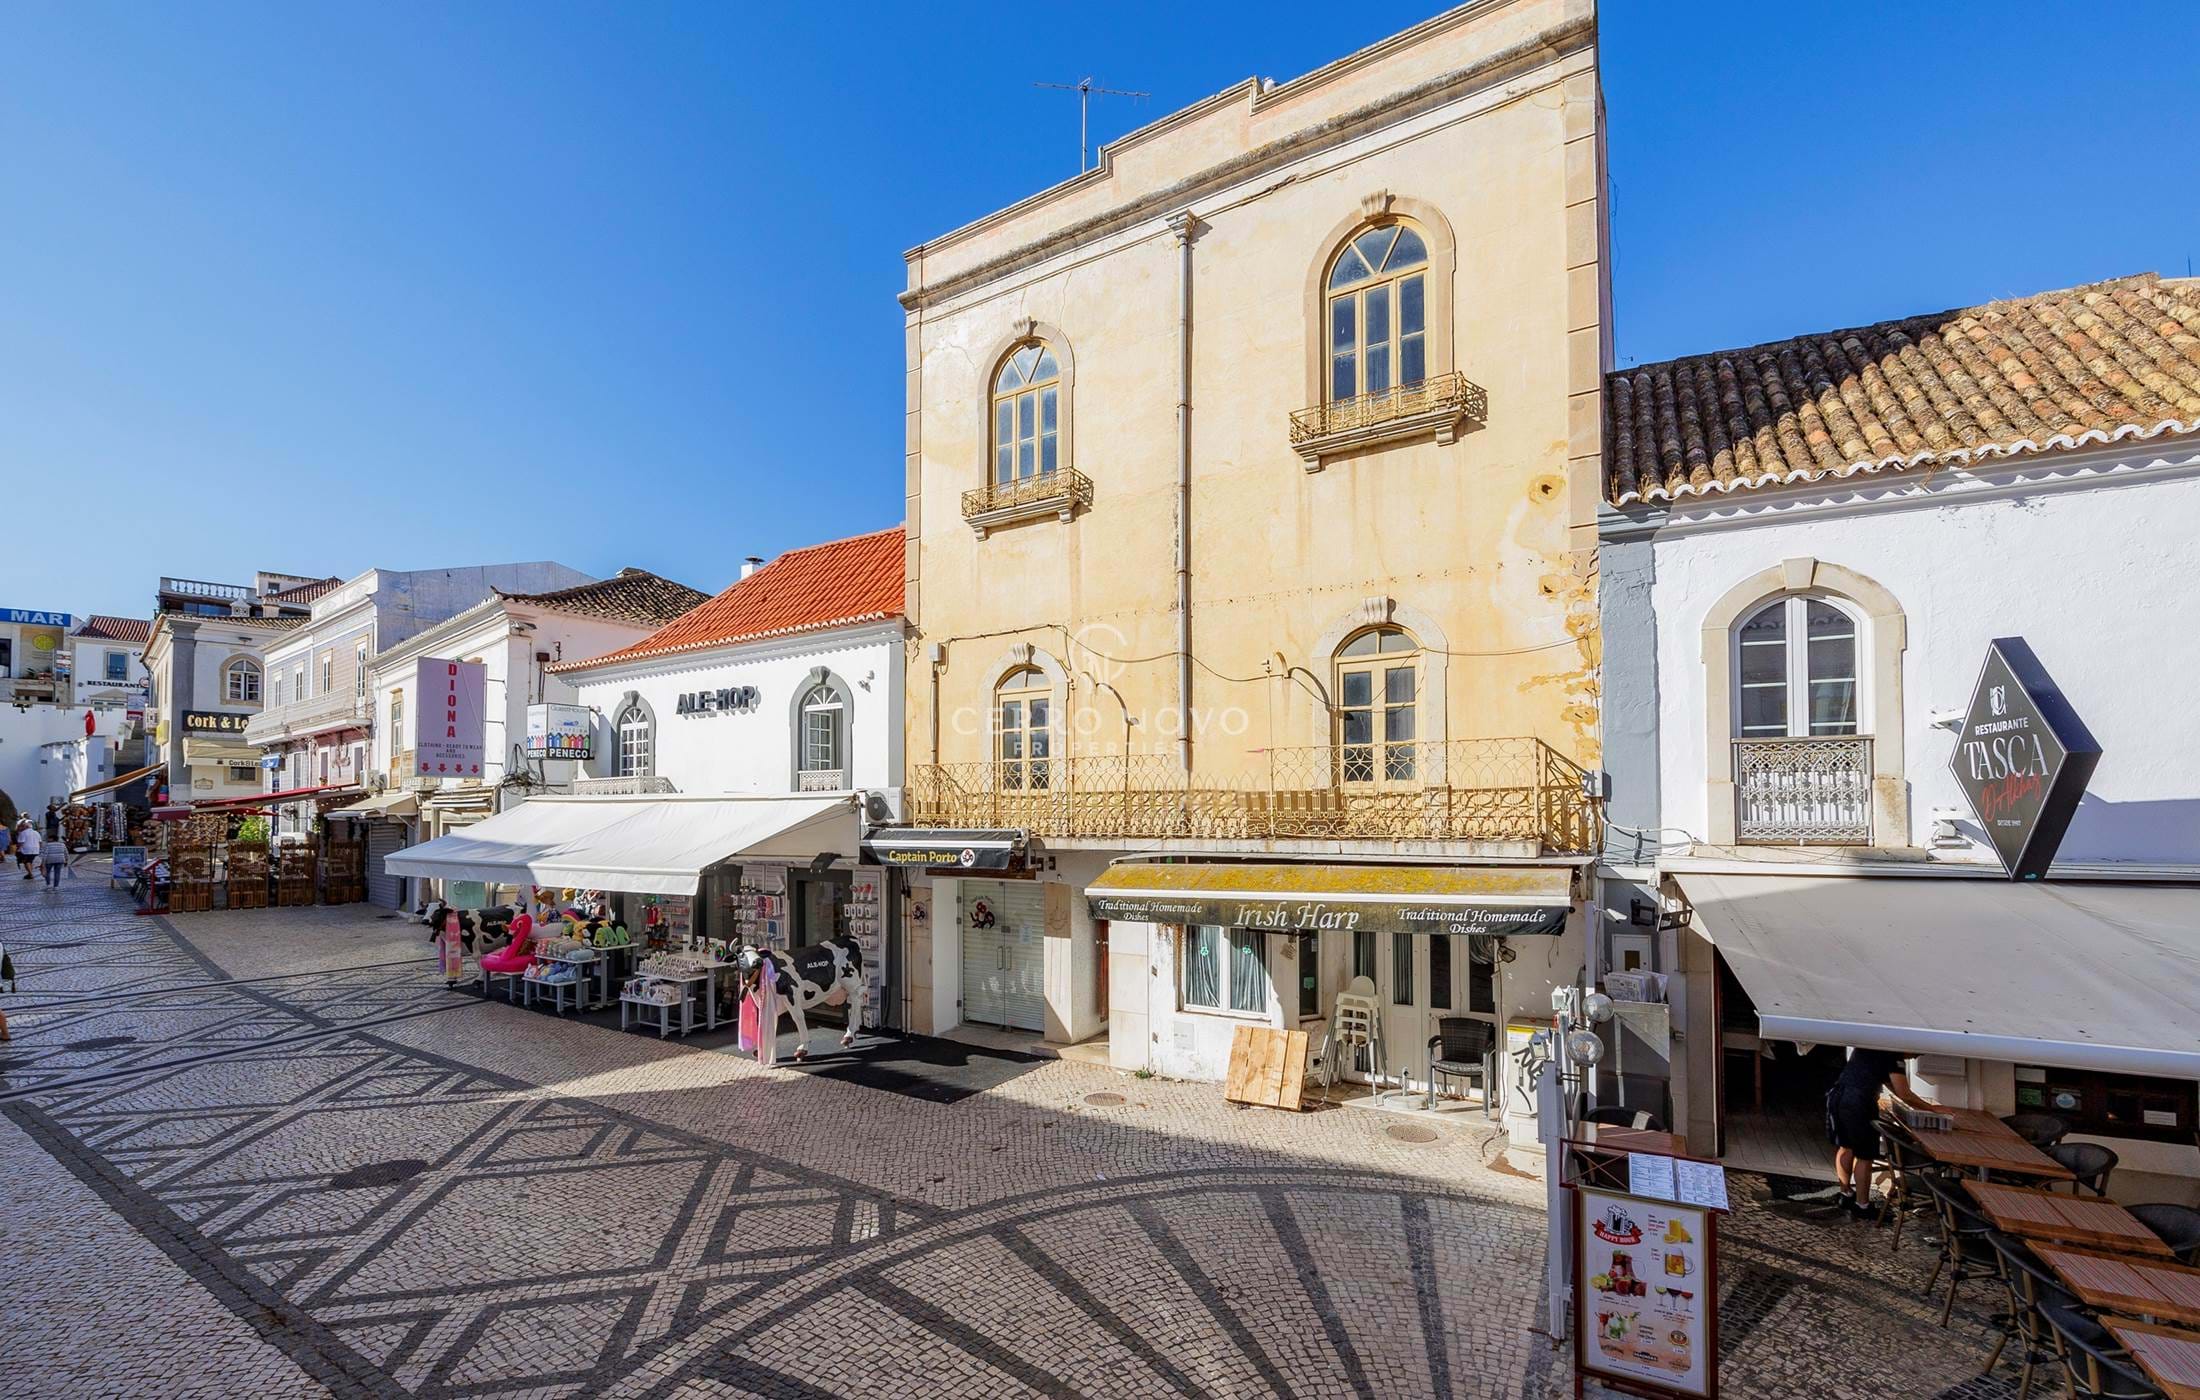 Historic Landmark Building in the preserved heart of Albufeira Old Town